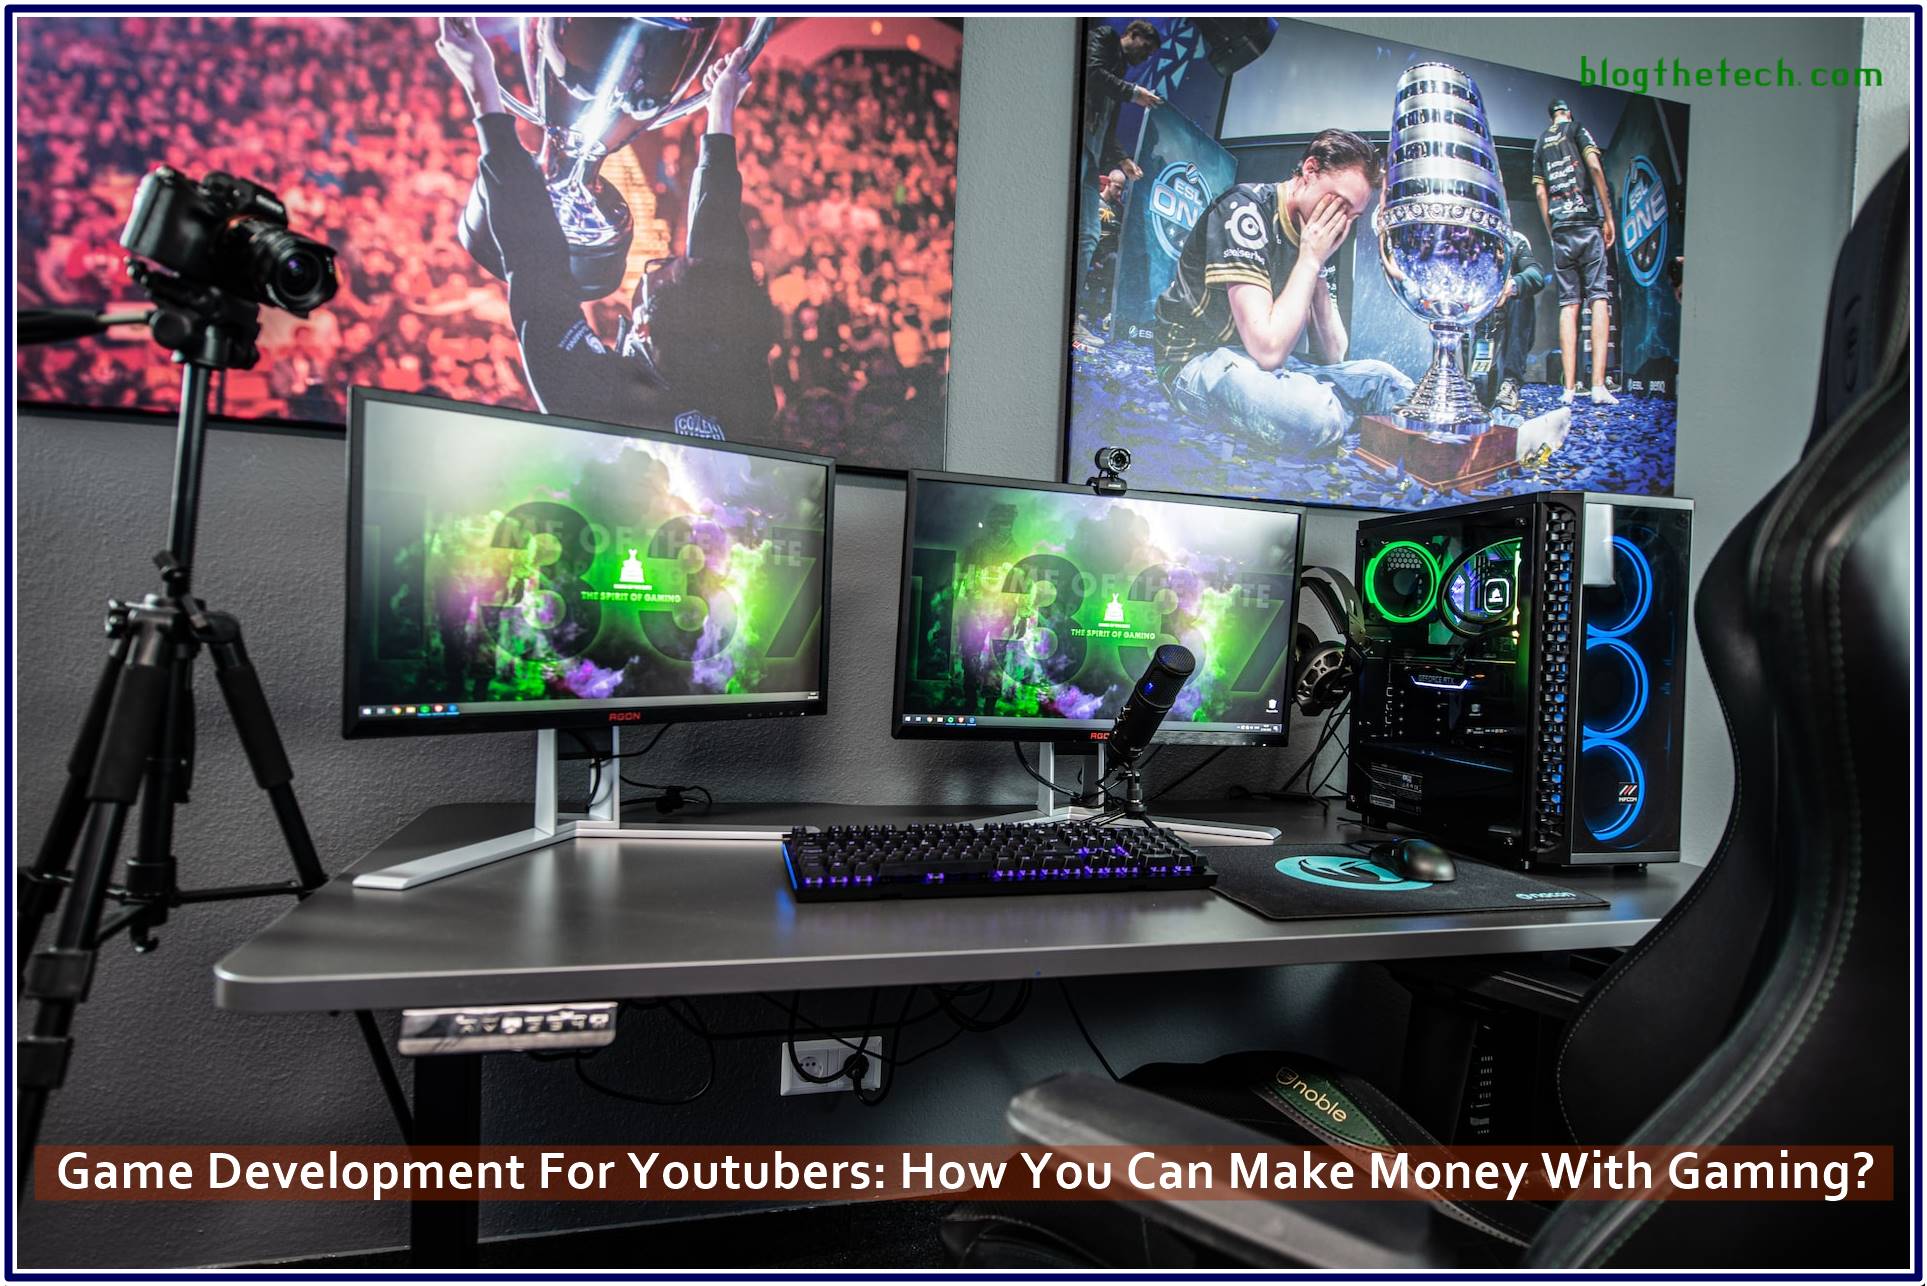 Game Development For Youtubers: How You Can Make Money With Gaming?